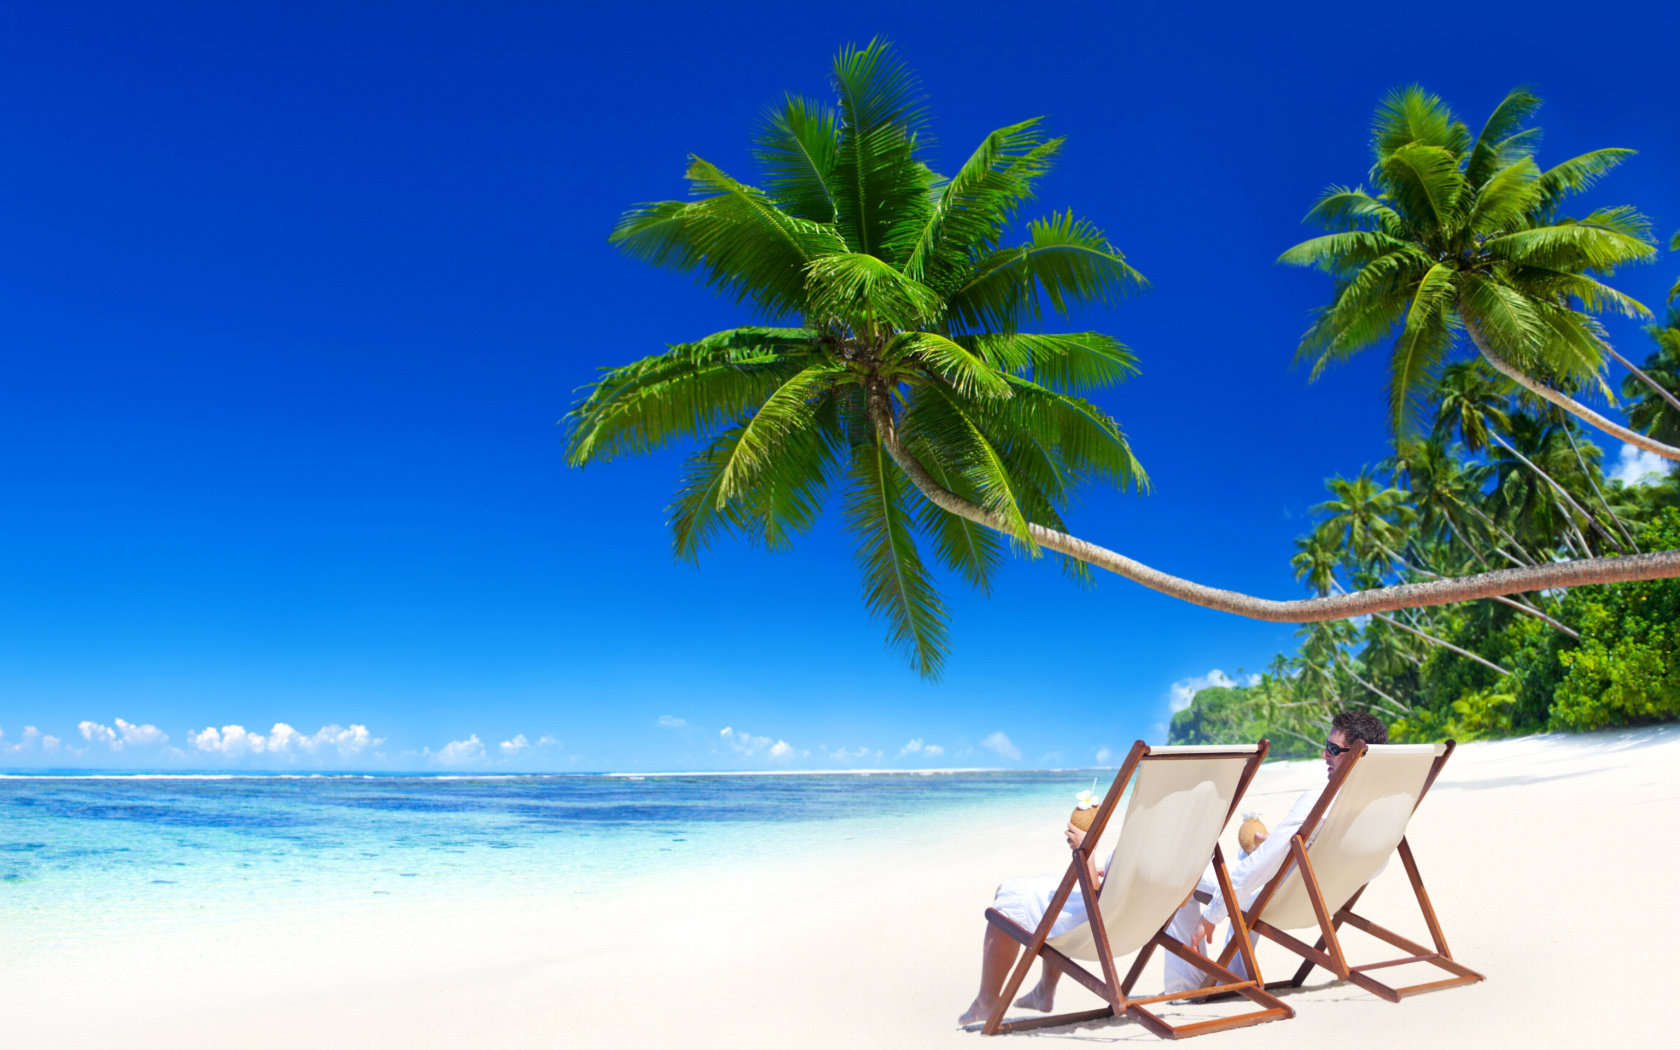 Vacation in Tropical Paradise wallpaper 1680x1050